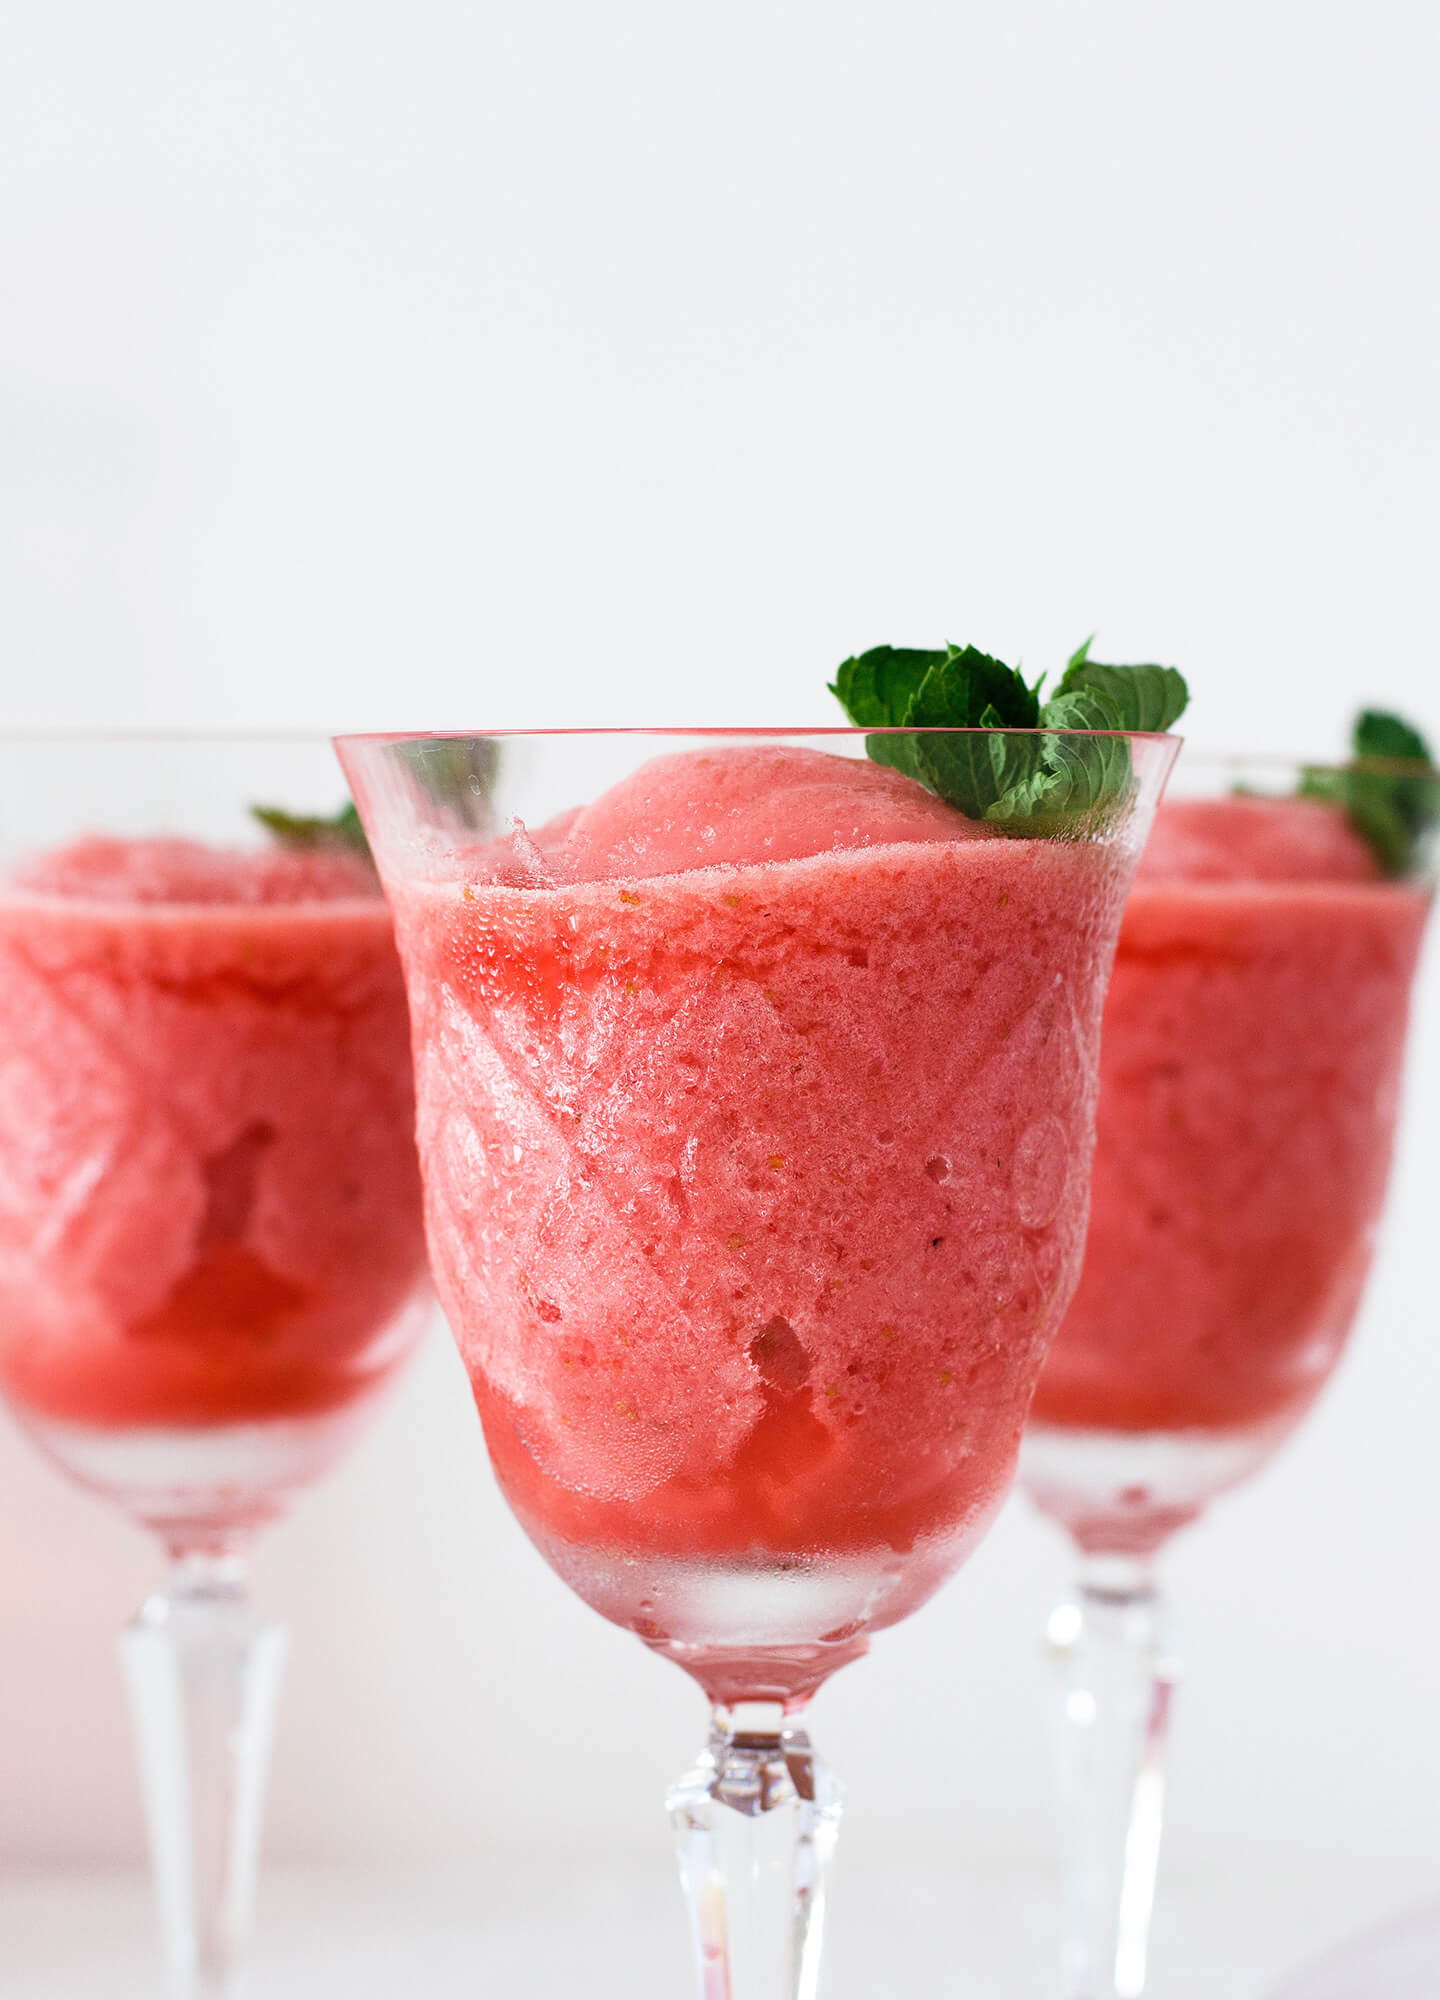 Super simple summer drink or dessert for adults. Lemon strawberry frosé (frozen rosé) that is refreshing, sweet and pretty to look at.